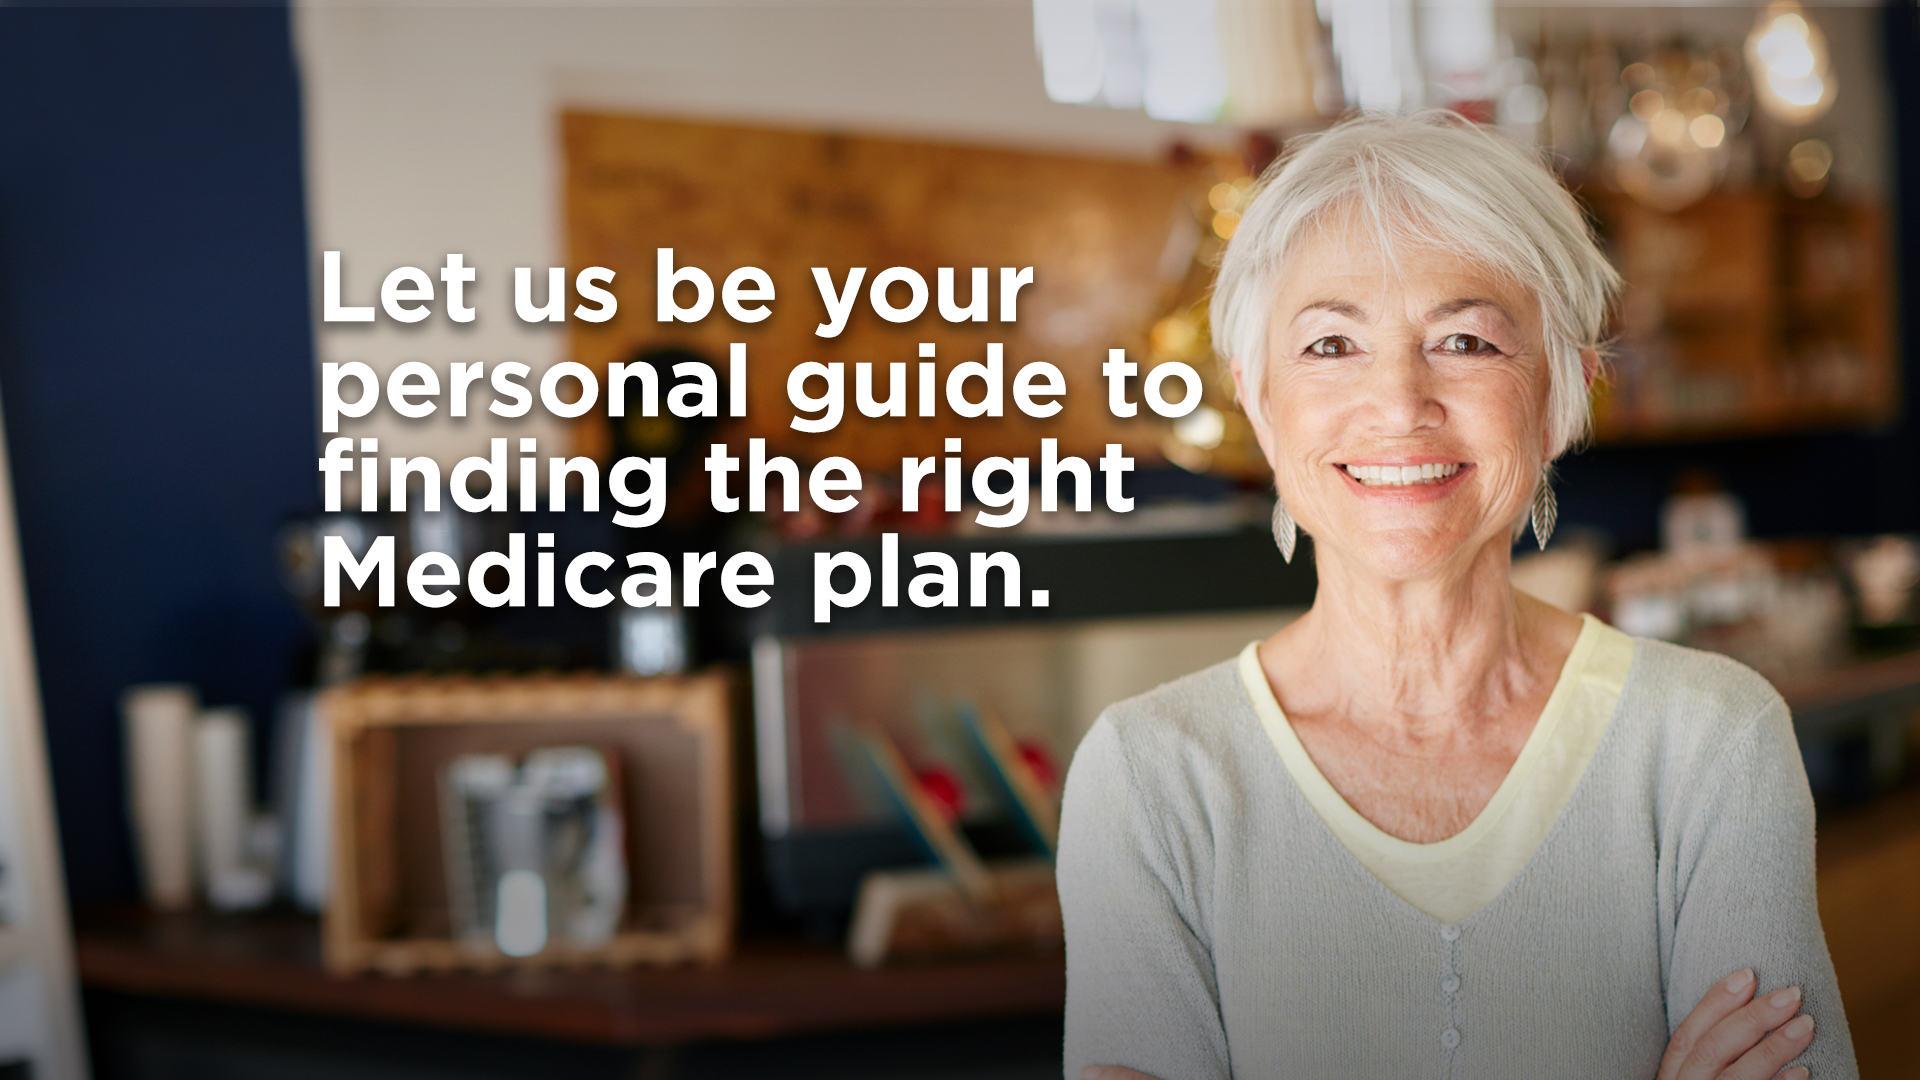 Let us be your personal guide to finding the right Medicare plan.